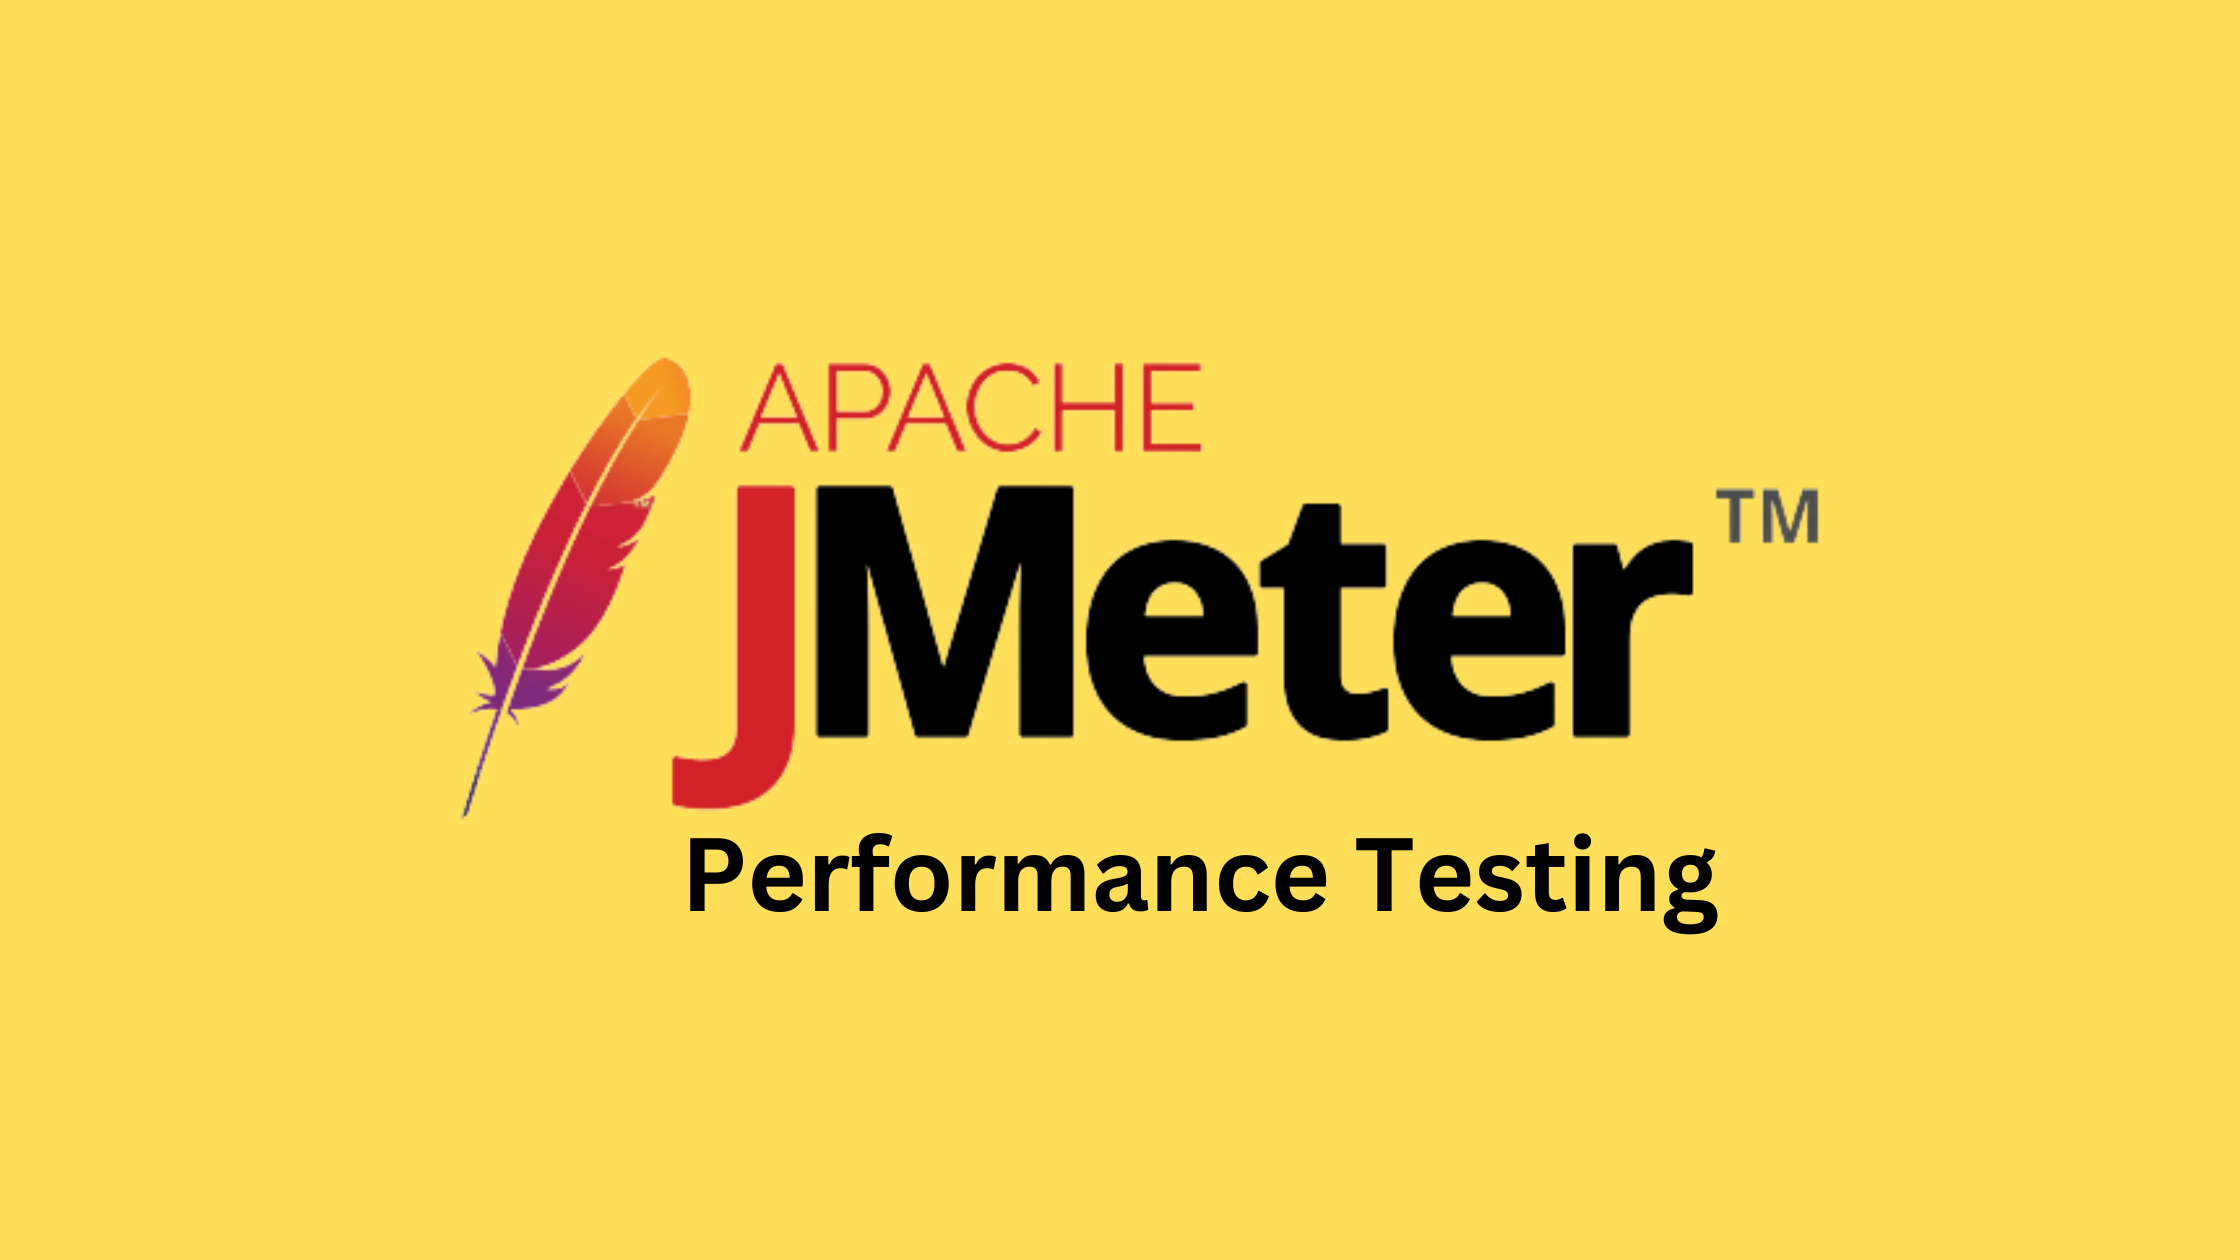 How to Do Distributed Mode Testing With Apache JMeter? - DS